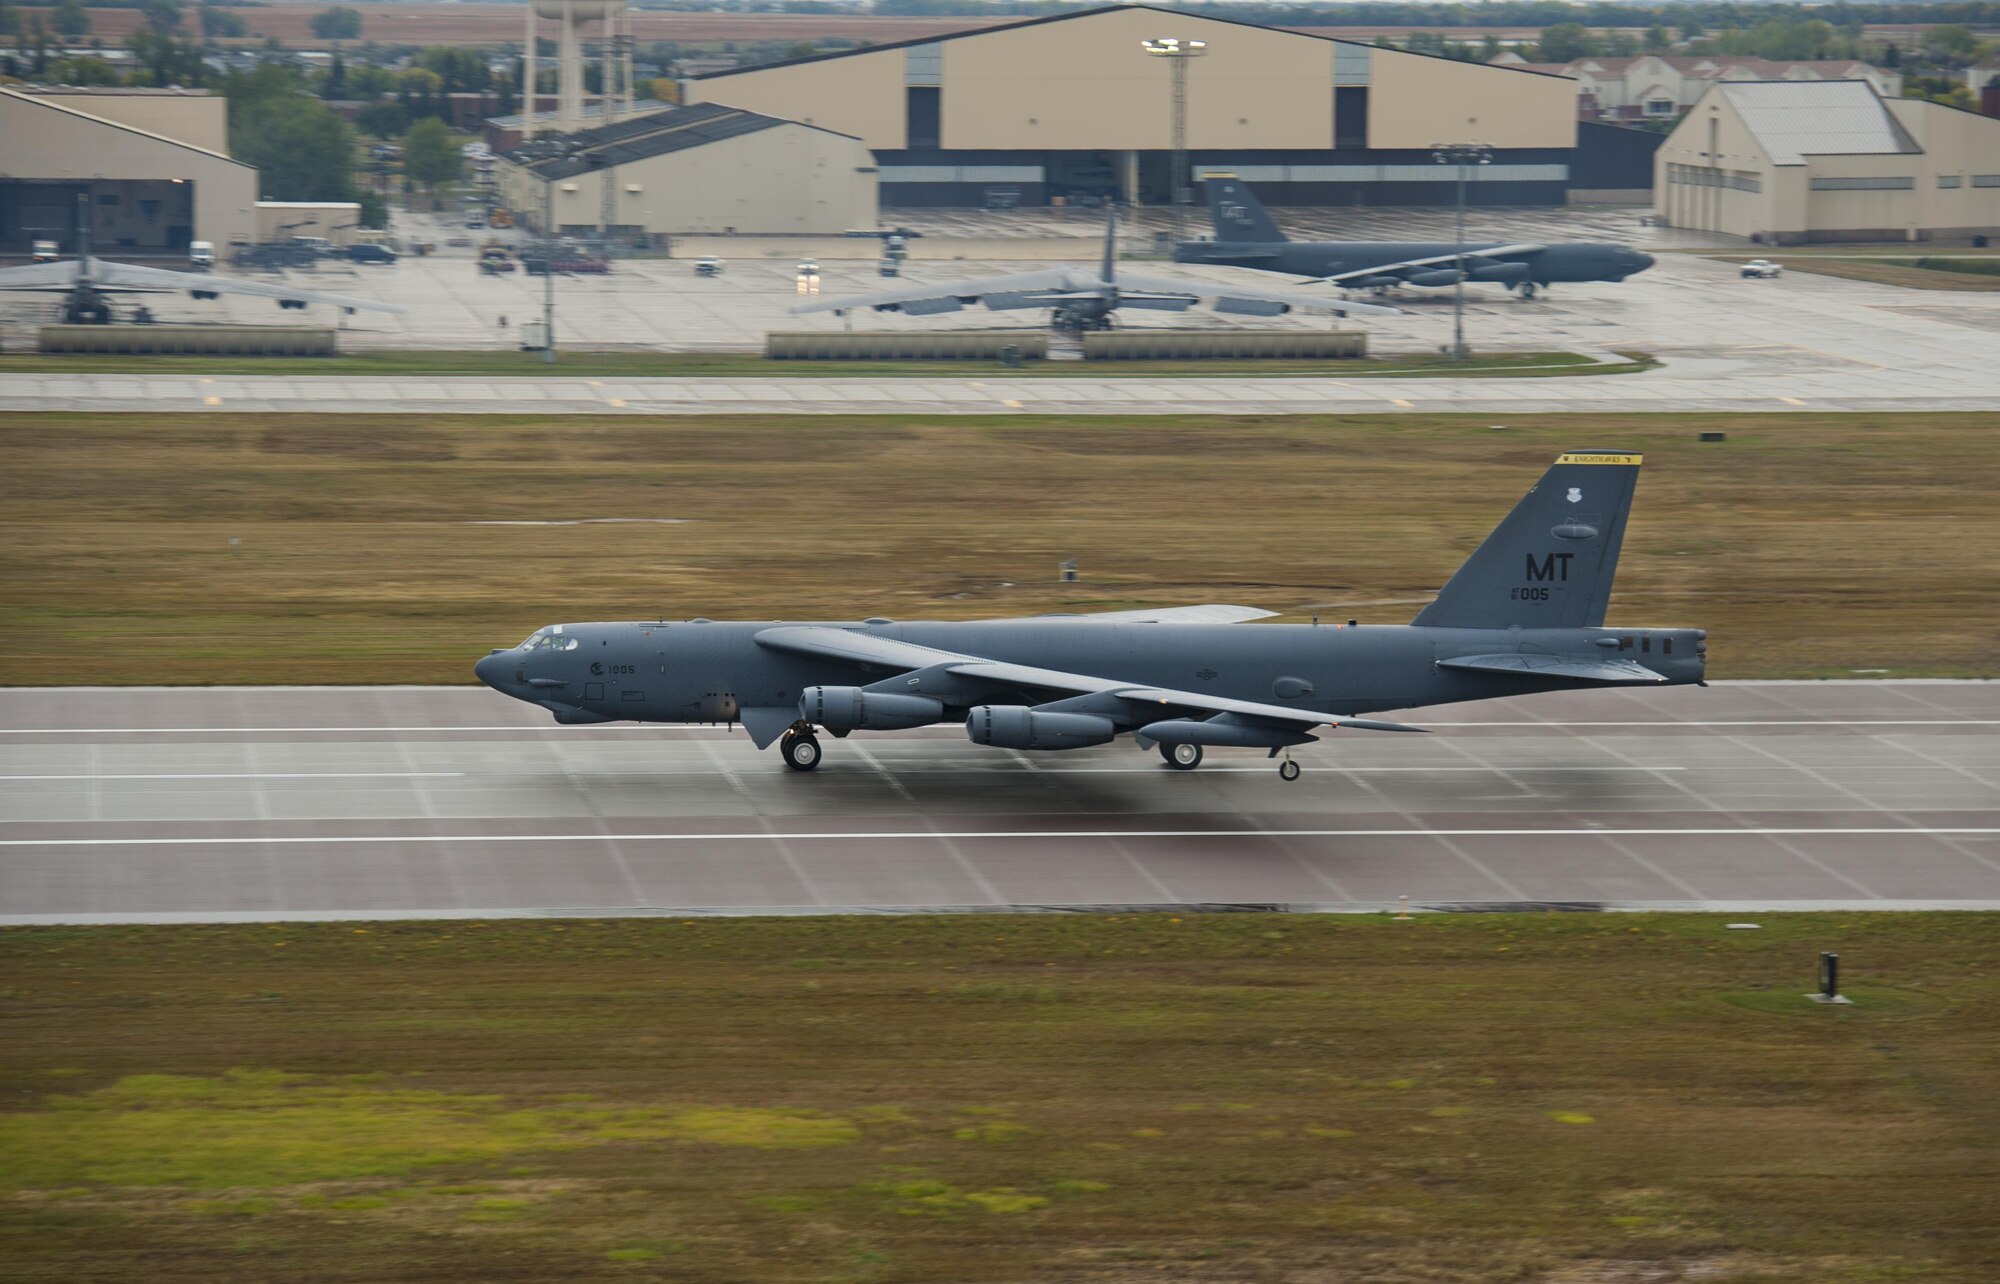 A B-52H Stratofortress taxis down the flightline during a rapid launch for Prairie Vigilance 16-1 at Minot Air Force Base, N.D., Sept. 16, 2016. The 5th Bomb Wing participated in Prairie Vigilance 16-1 Sept. 11-16, an annual exercise designed to test the wing’s ability to conduct conventional and nuclear-capable bomber operations. (U.S. Air Force photo/Airman 1st Class Christian Sullivan)